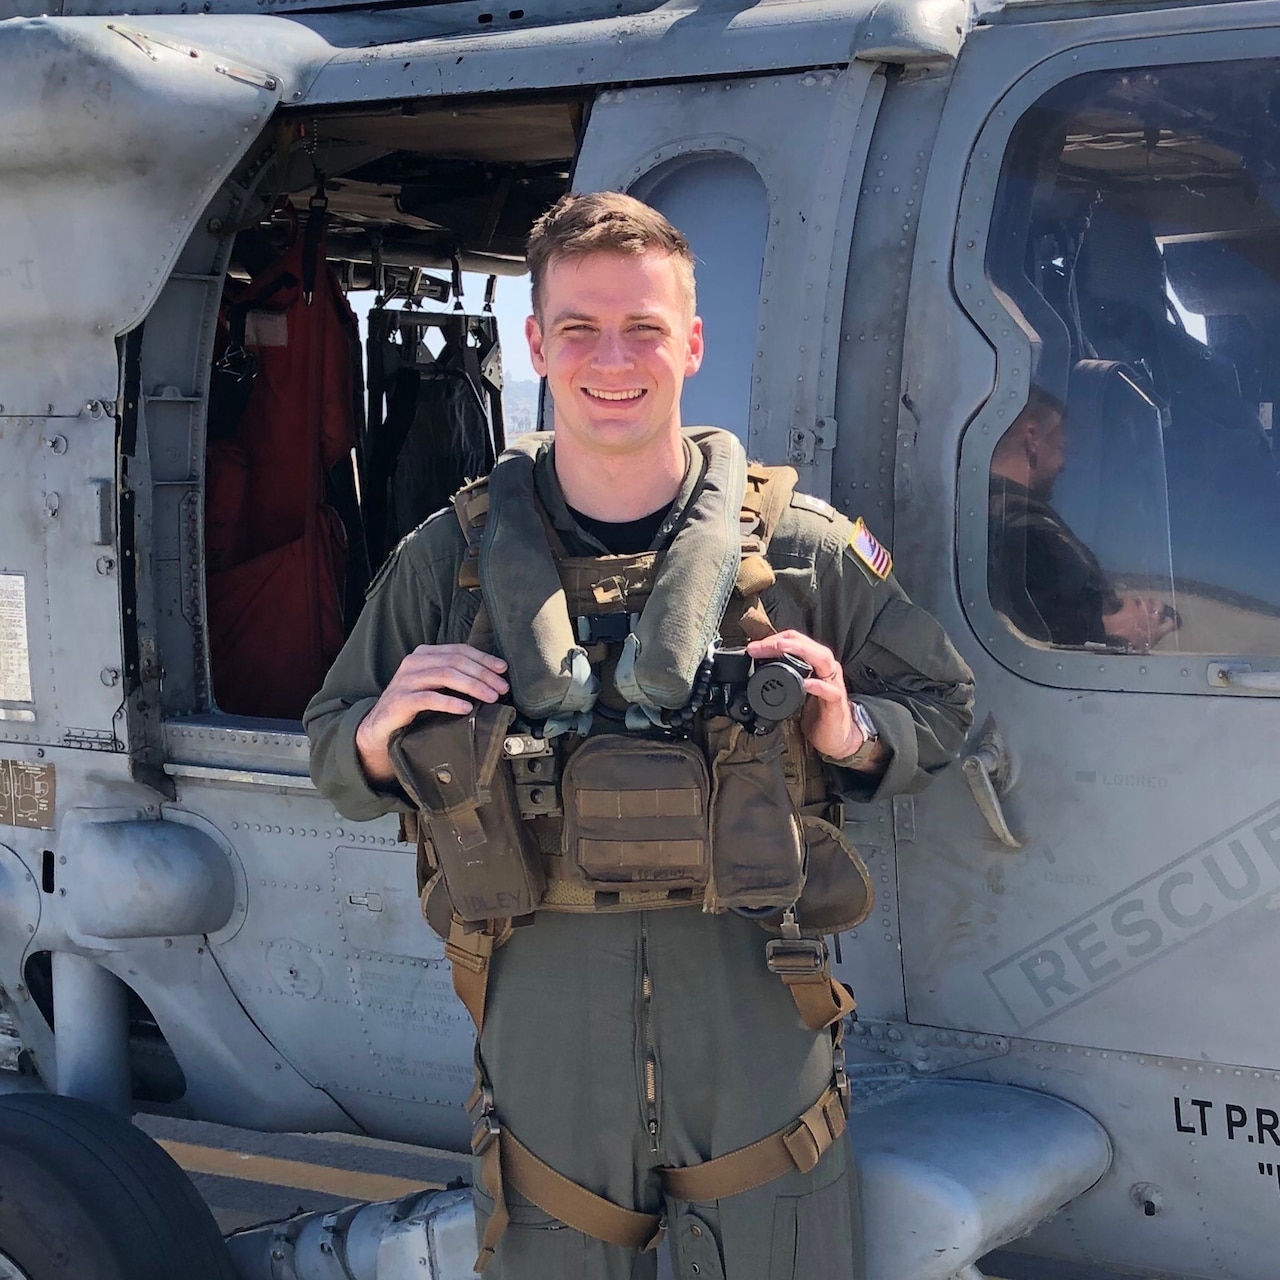 FILE PHOTO of Lt. Paul R. Fridley, 28, a pilot from Annandale, Virginia. Fridley was one of five Sailors killed when an MH-60S Seahawk helicopter, assigned to Helicopter Sea Combat Squadron (HSC) 8, crashed approximately 60 nautical miles off the coast of San Diego, Aug. 31.